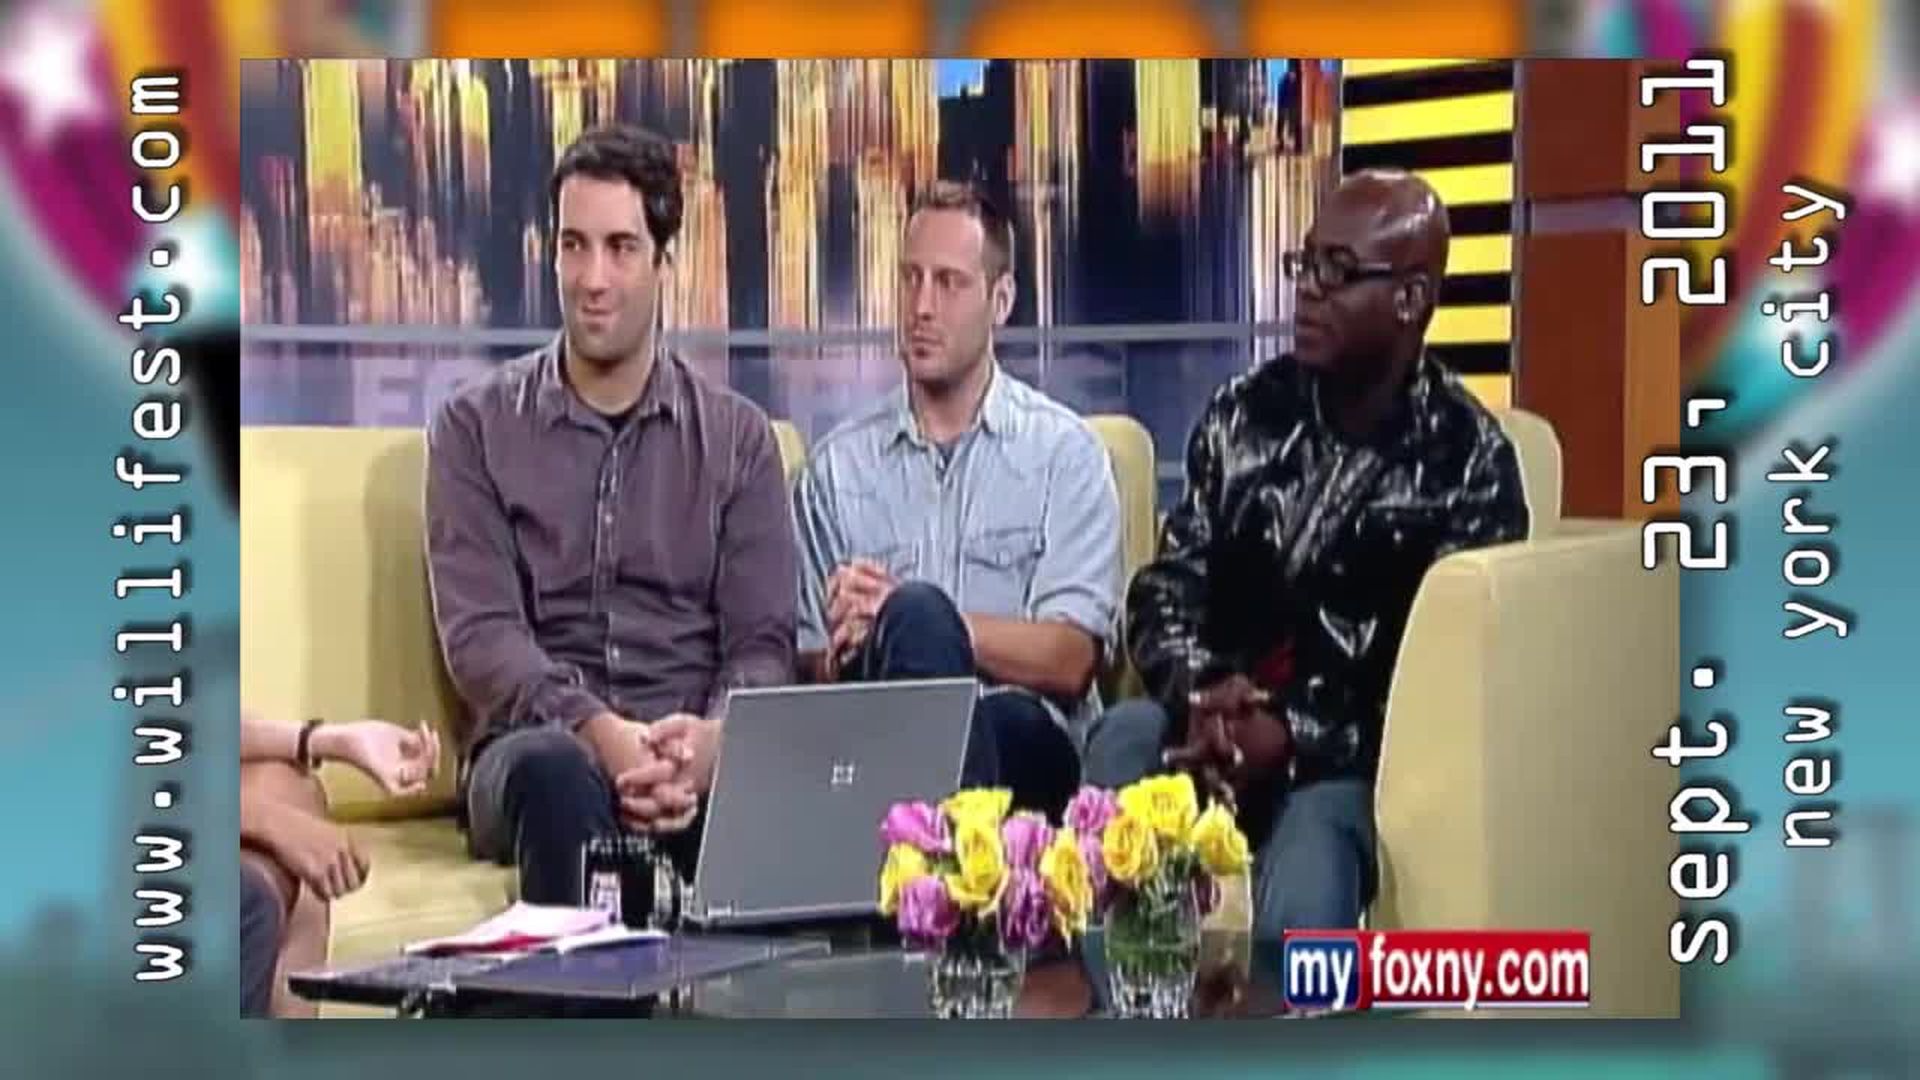 WILLiFEST and GOOD DAY New York on WNYW FOX 5 (2011)